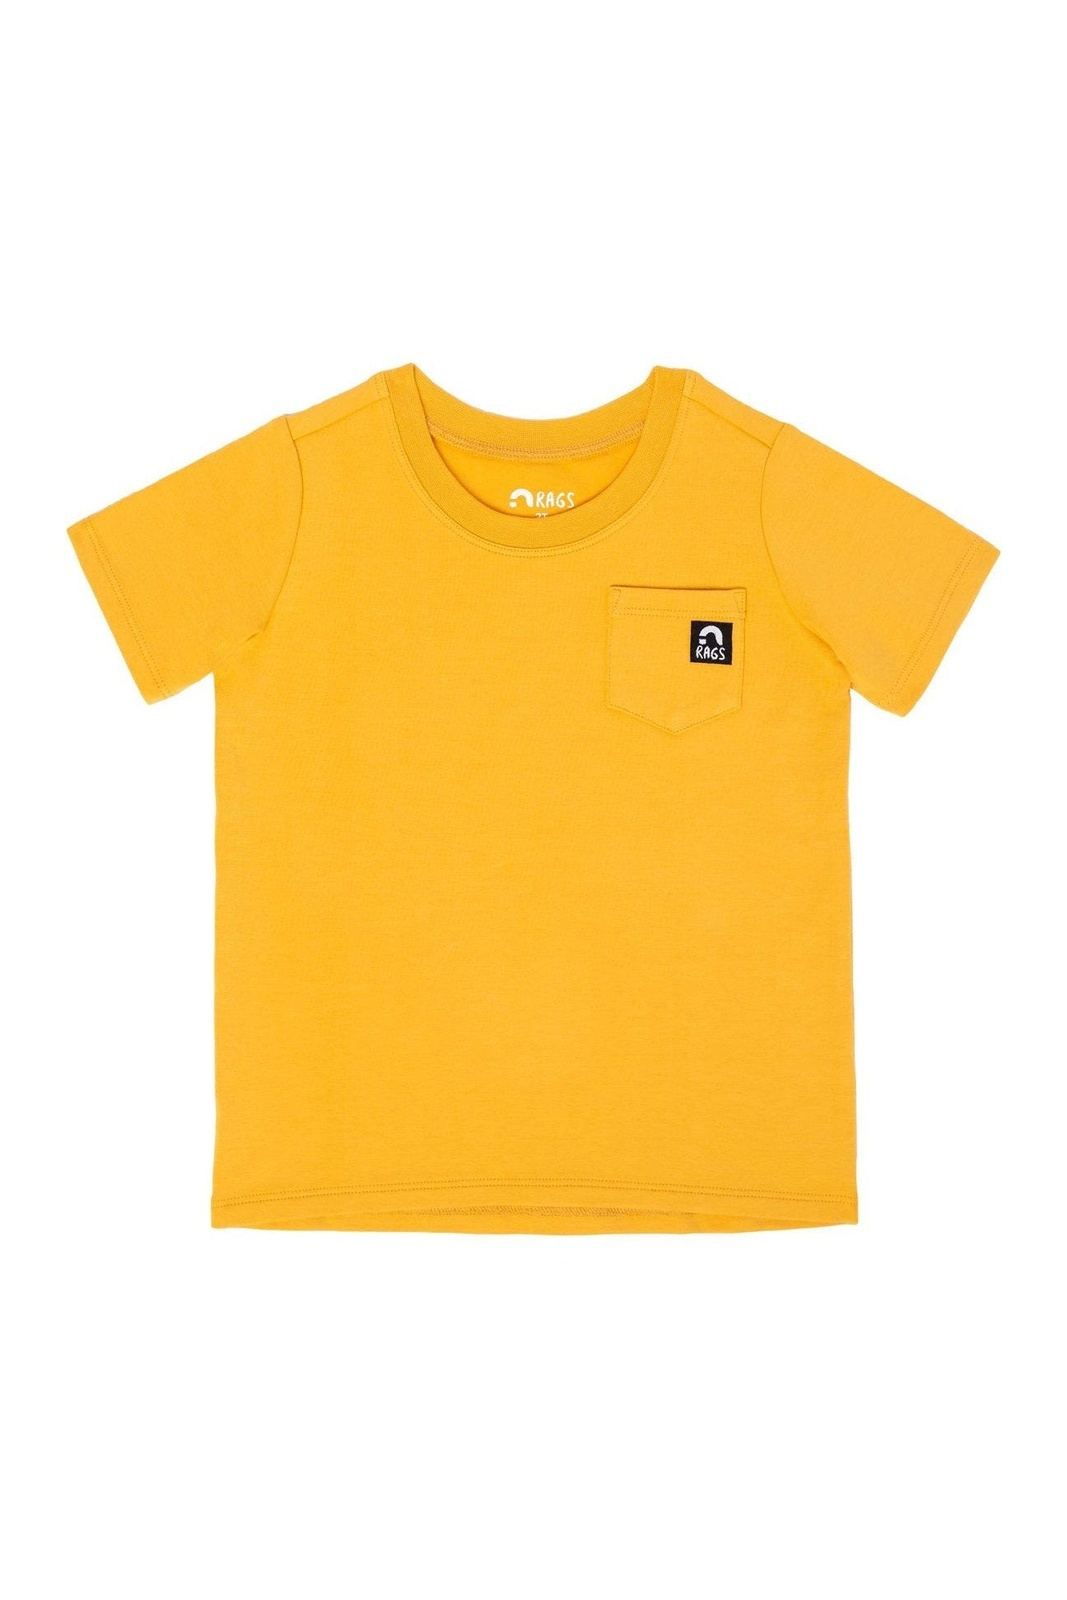 Essentials Short Sleeve Chest Pocket Rounded Tee - 'Honey' - Tea for Three: A Children's Boutique-New Arrivals-TheT43Shop